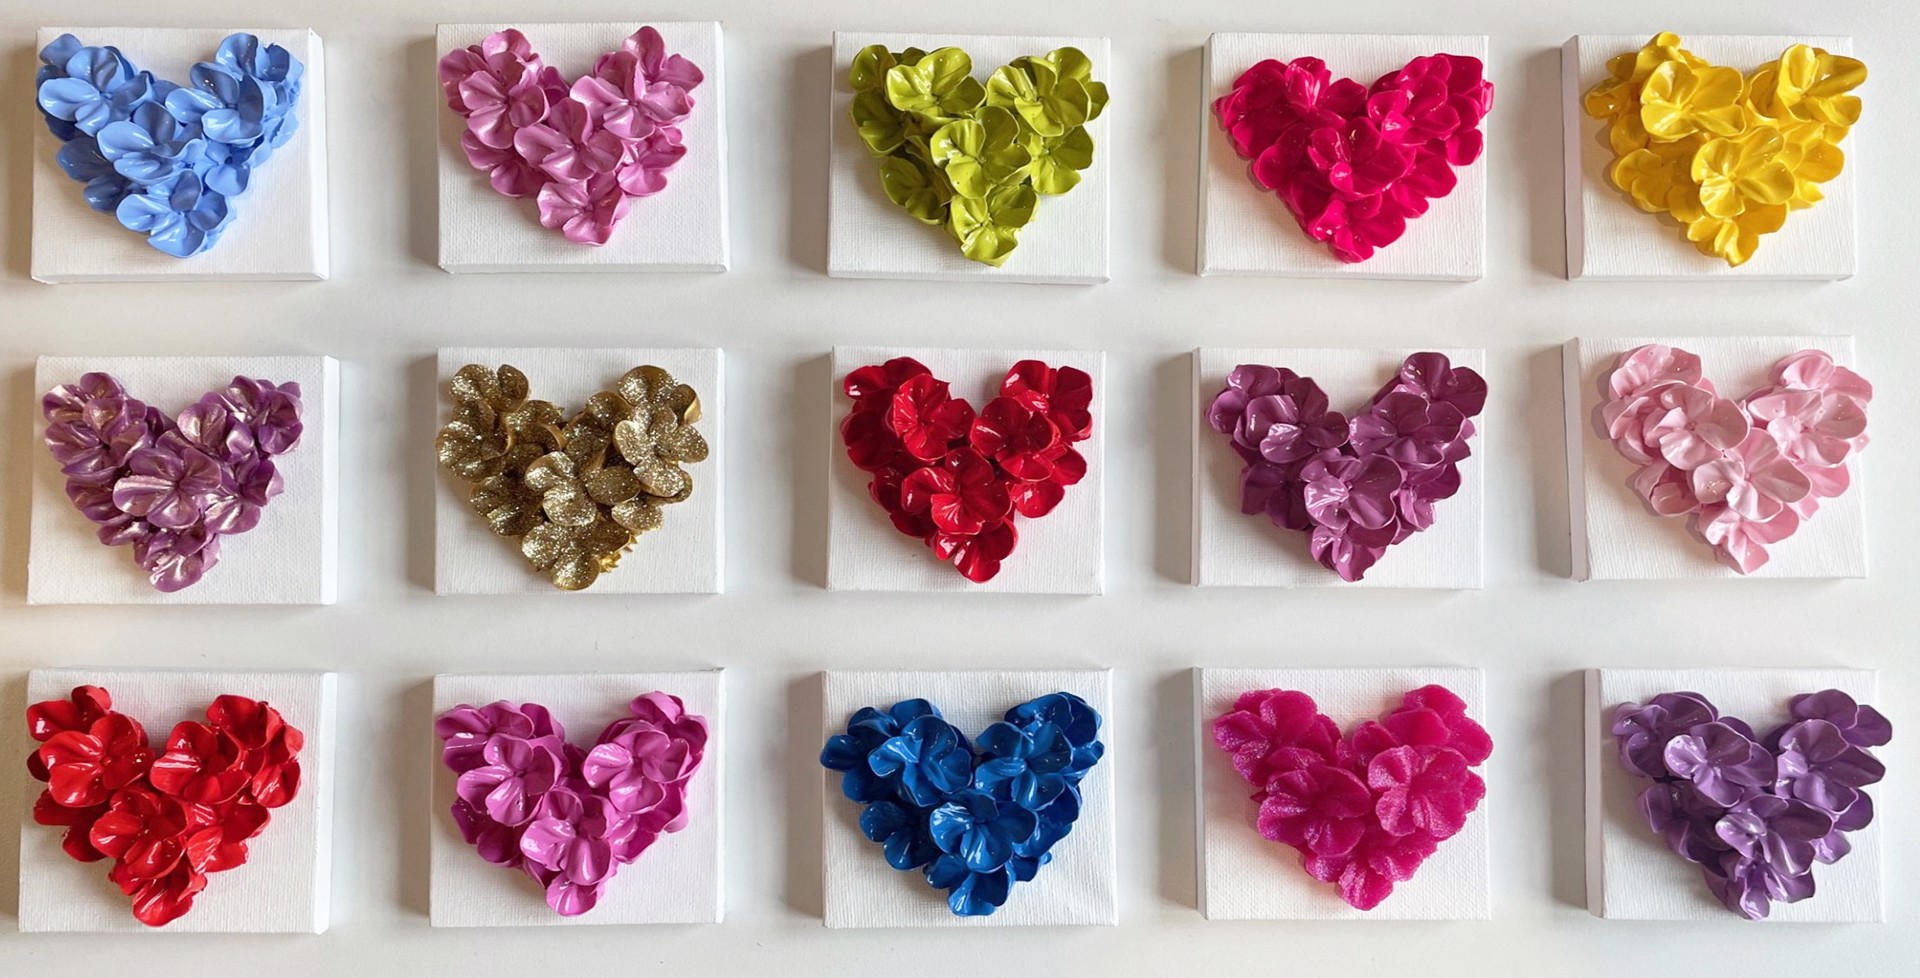 Heart Collection by Christine Tonolini